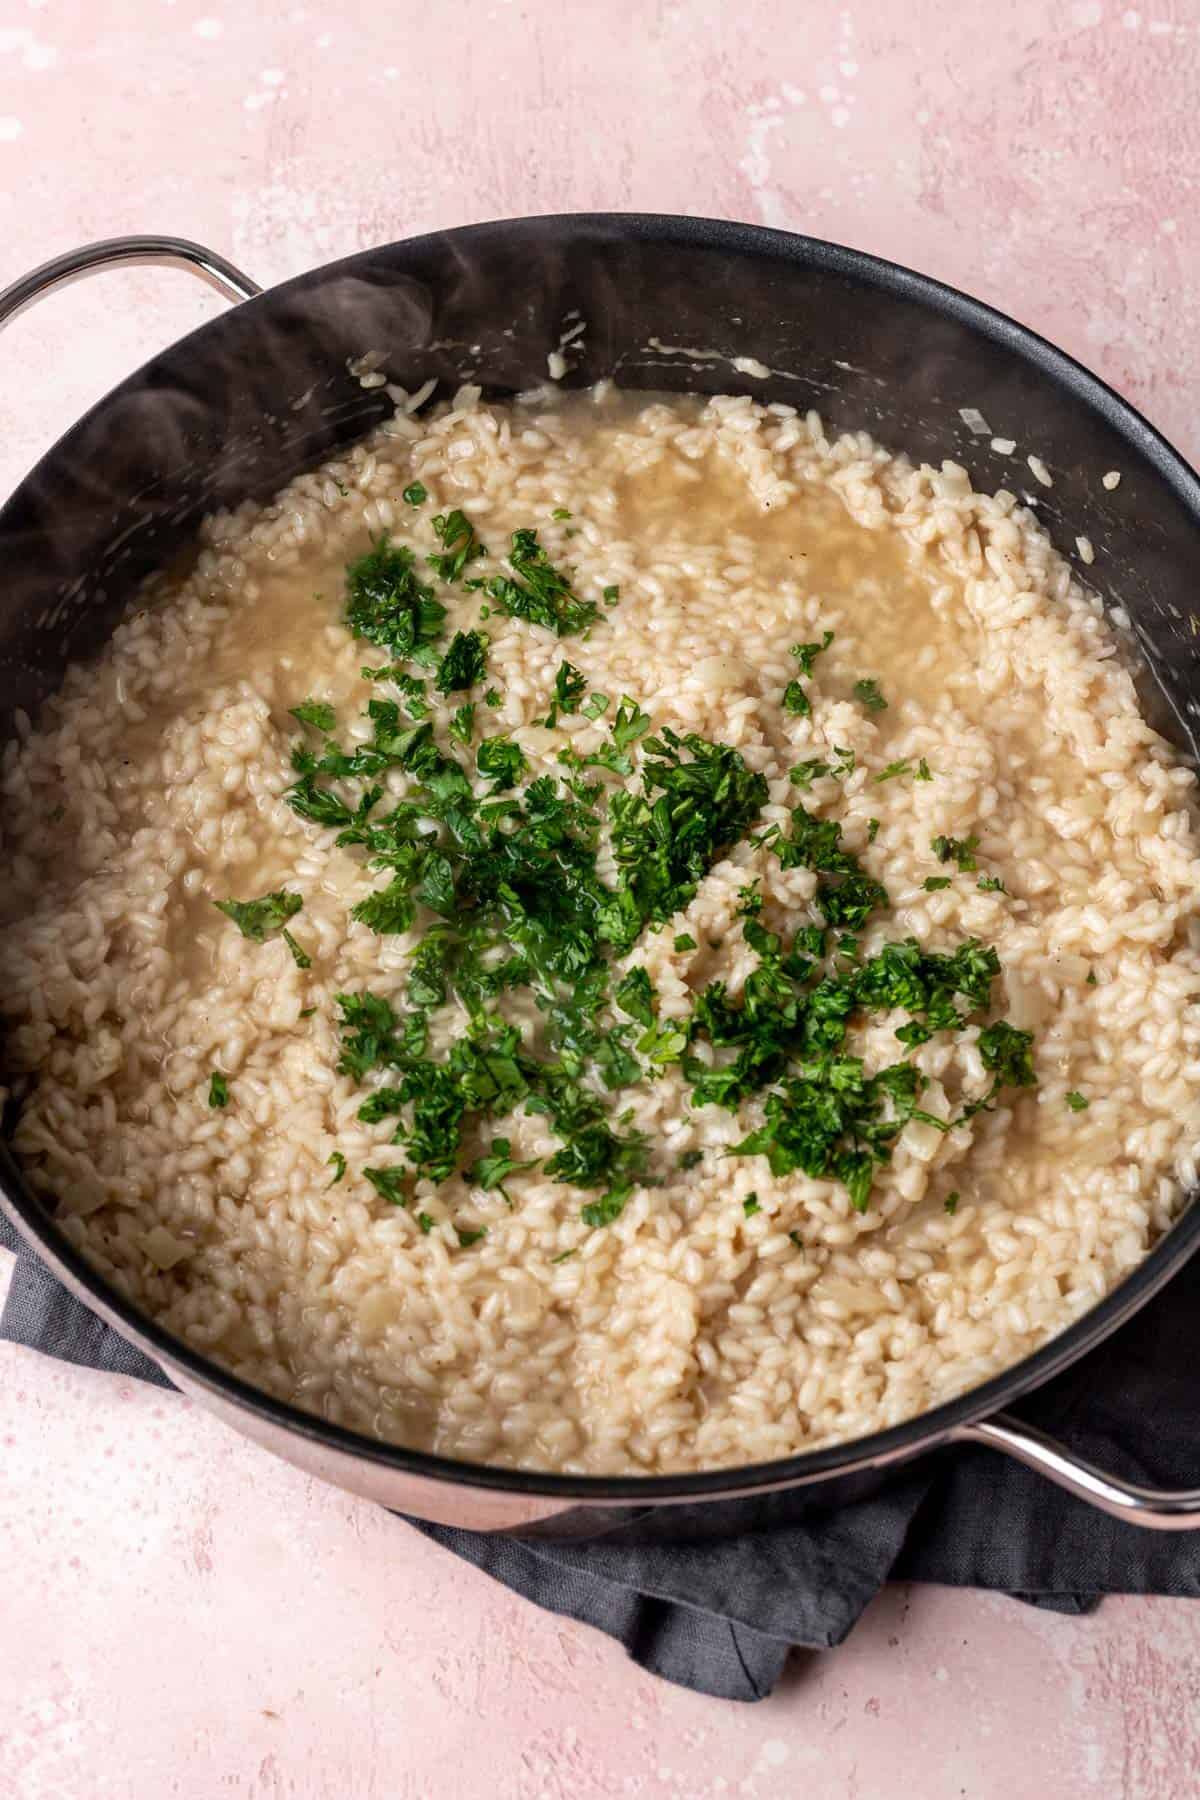 Parsley added to the almost fully cooked risotto in a large skillet.